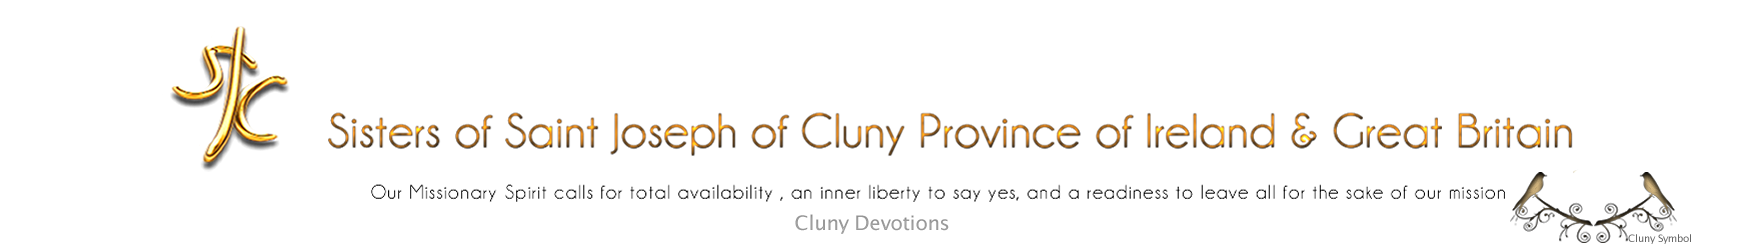 clunydevotions